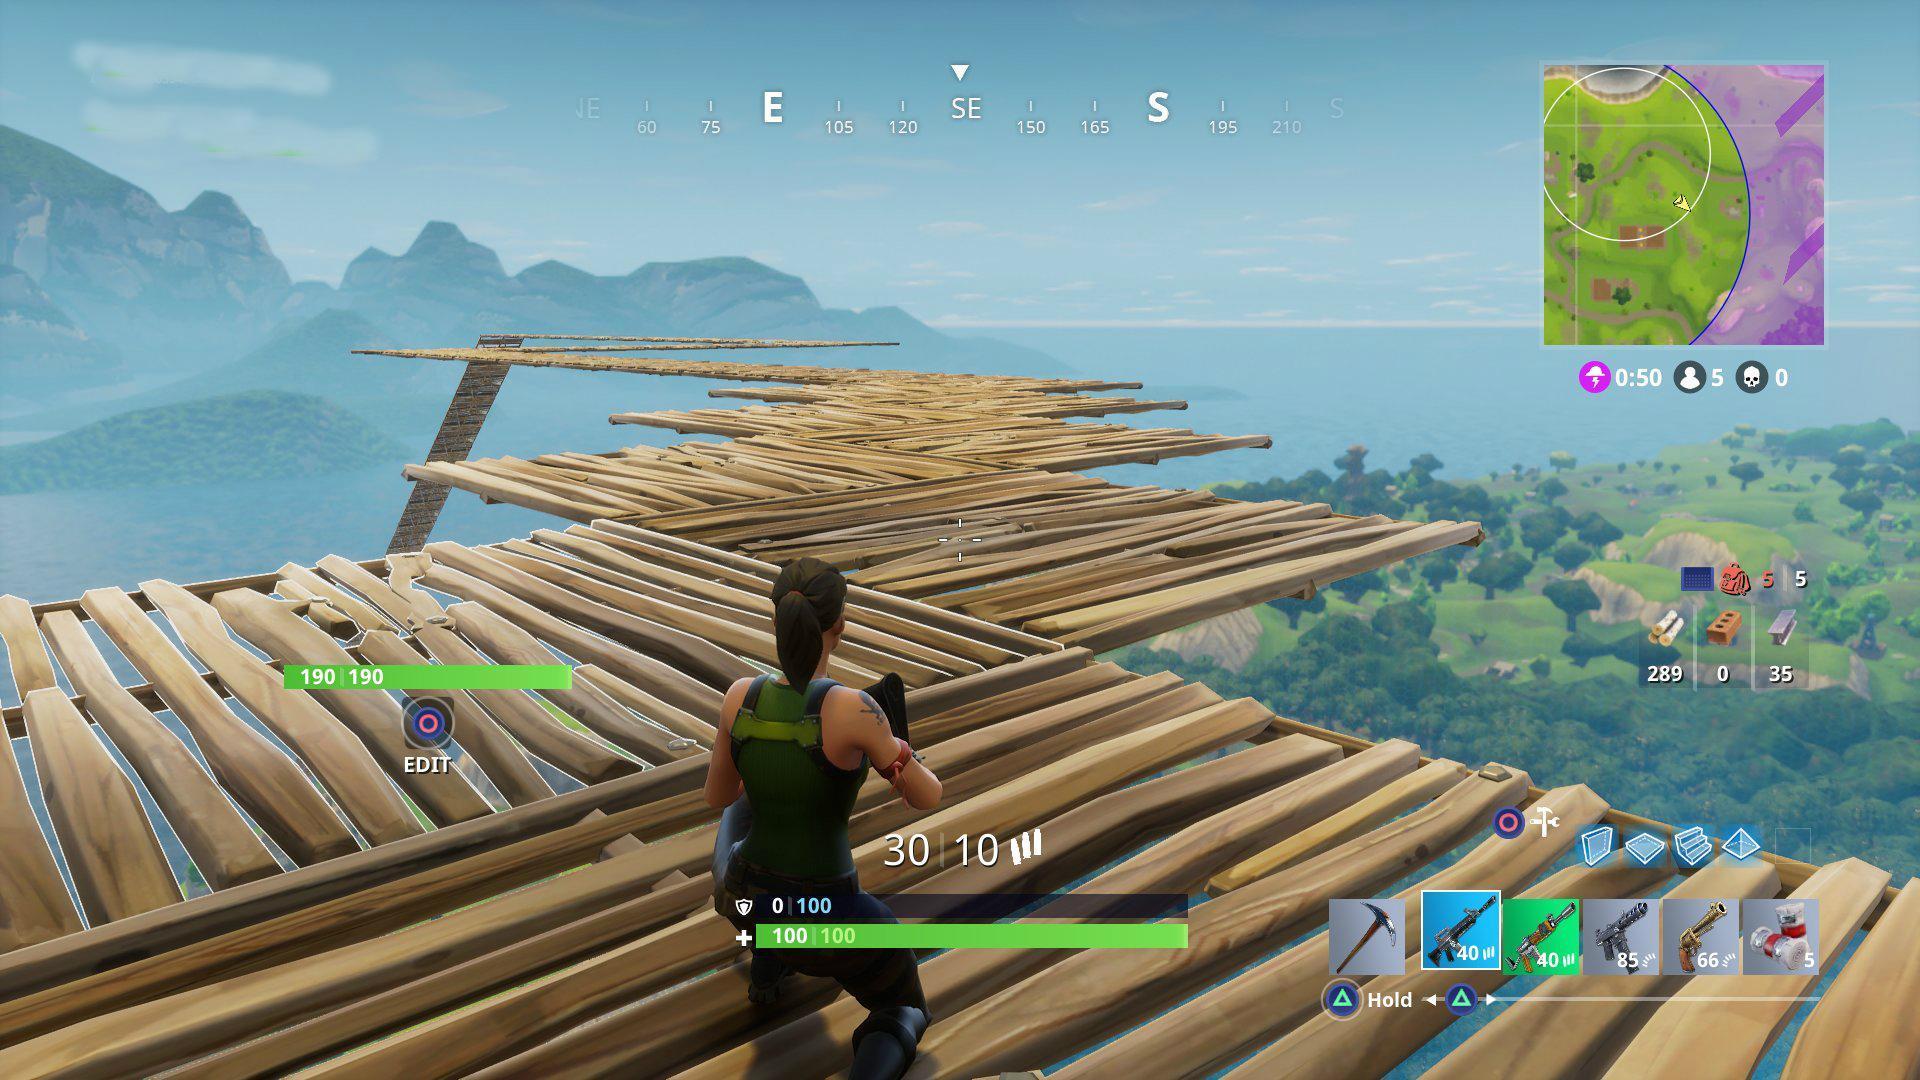 What Is A Skybase In Fortnite Port A Fort Can Save You From A Sky Base Fall In Fortnite